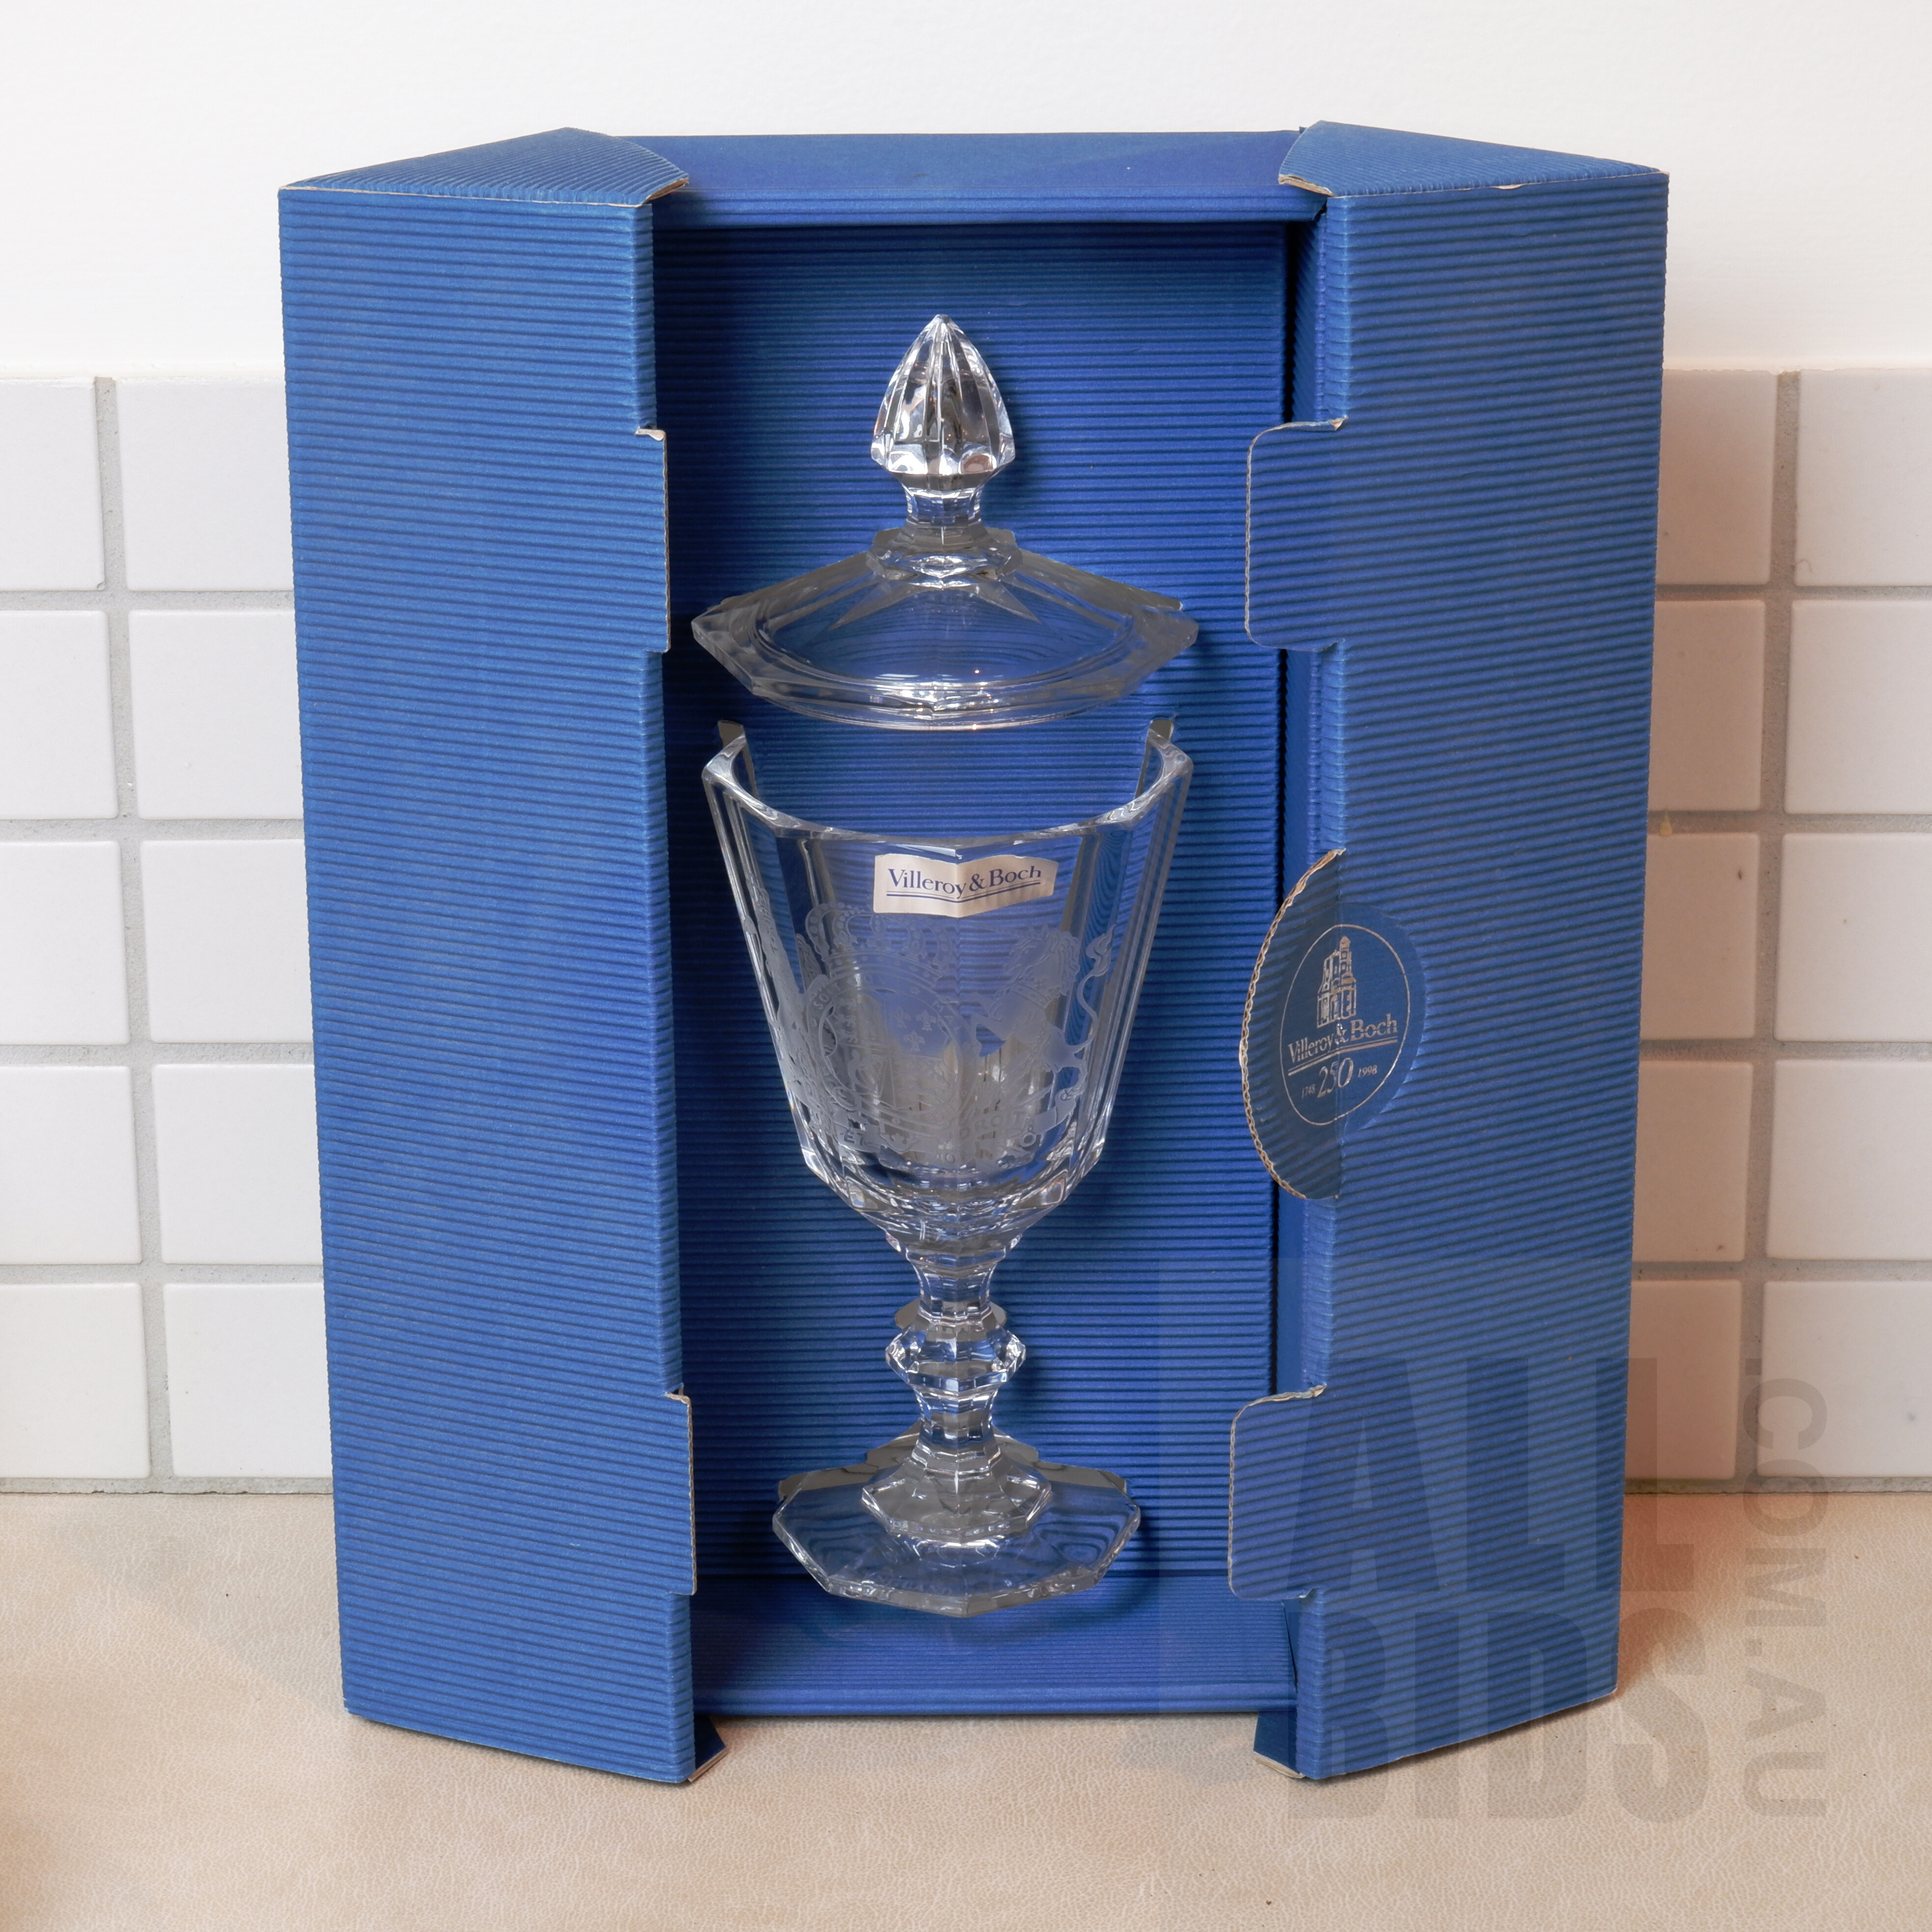 'Boxed Villeroy and Boch 1948-1998 250 Year Commemorative Wine Goblet'